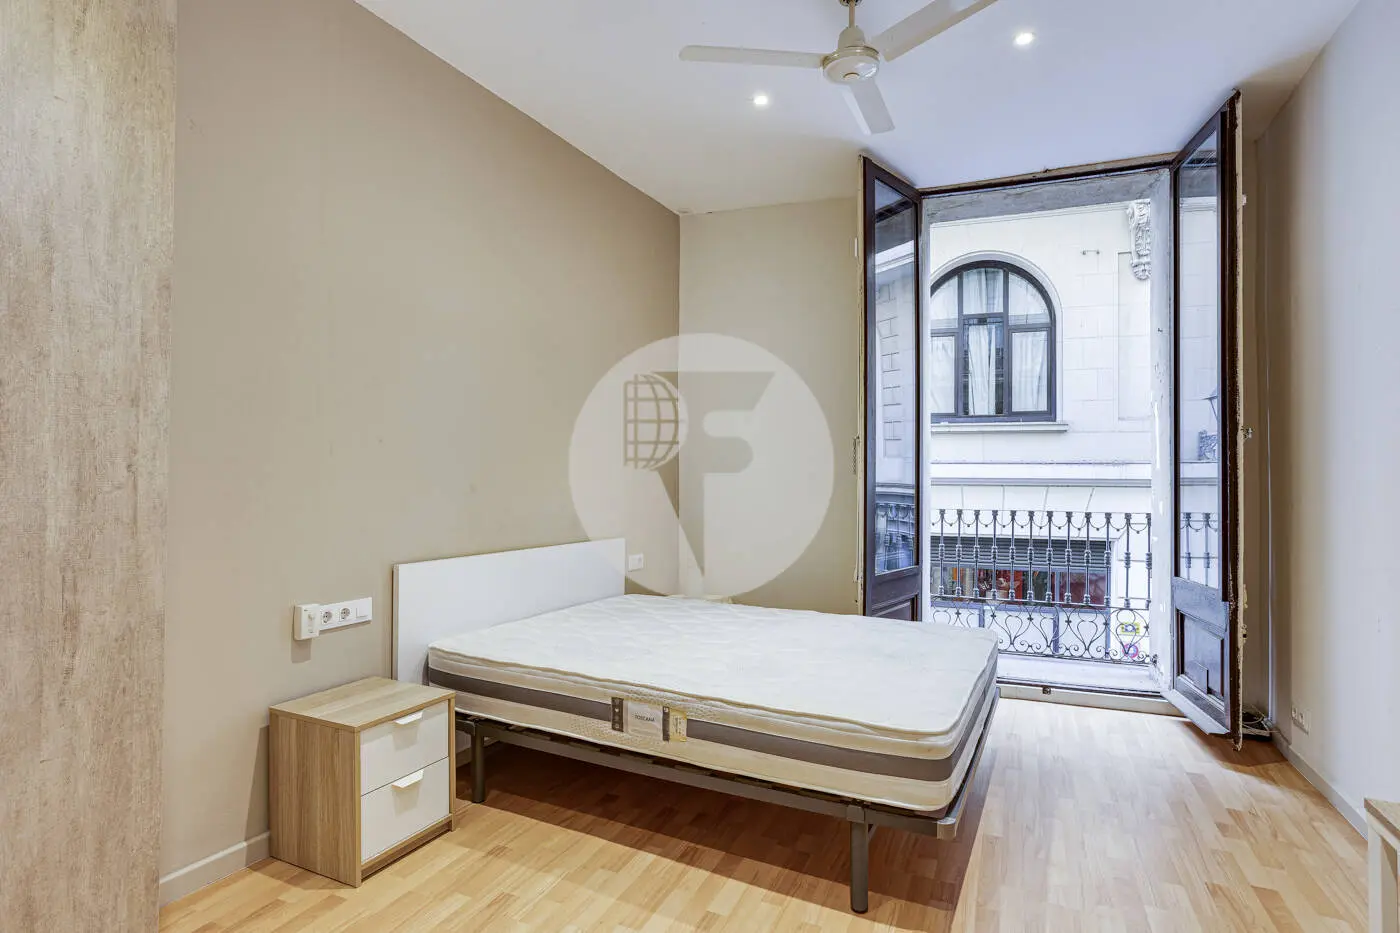 Magnificent apartment for sale next to Pl Universitat of 114m2 according to the land registry, located on Tallers Street in the Ciutat Vella neighborhood of Barcelona 8